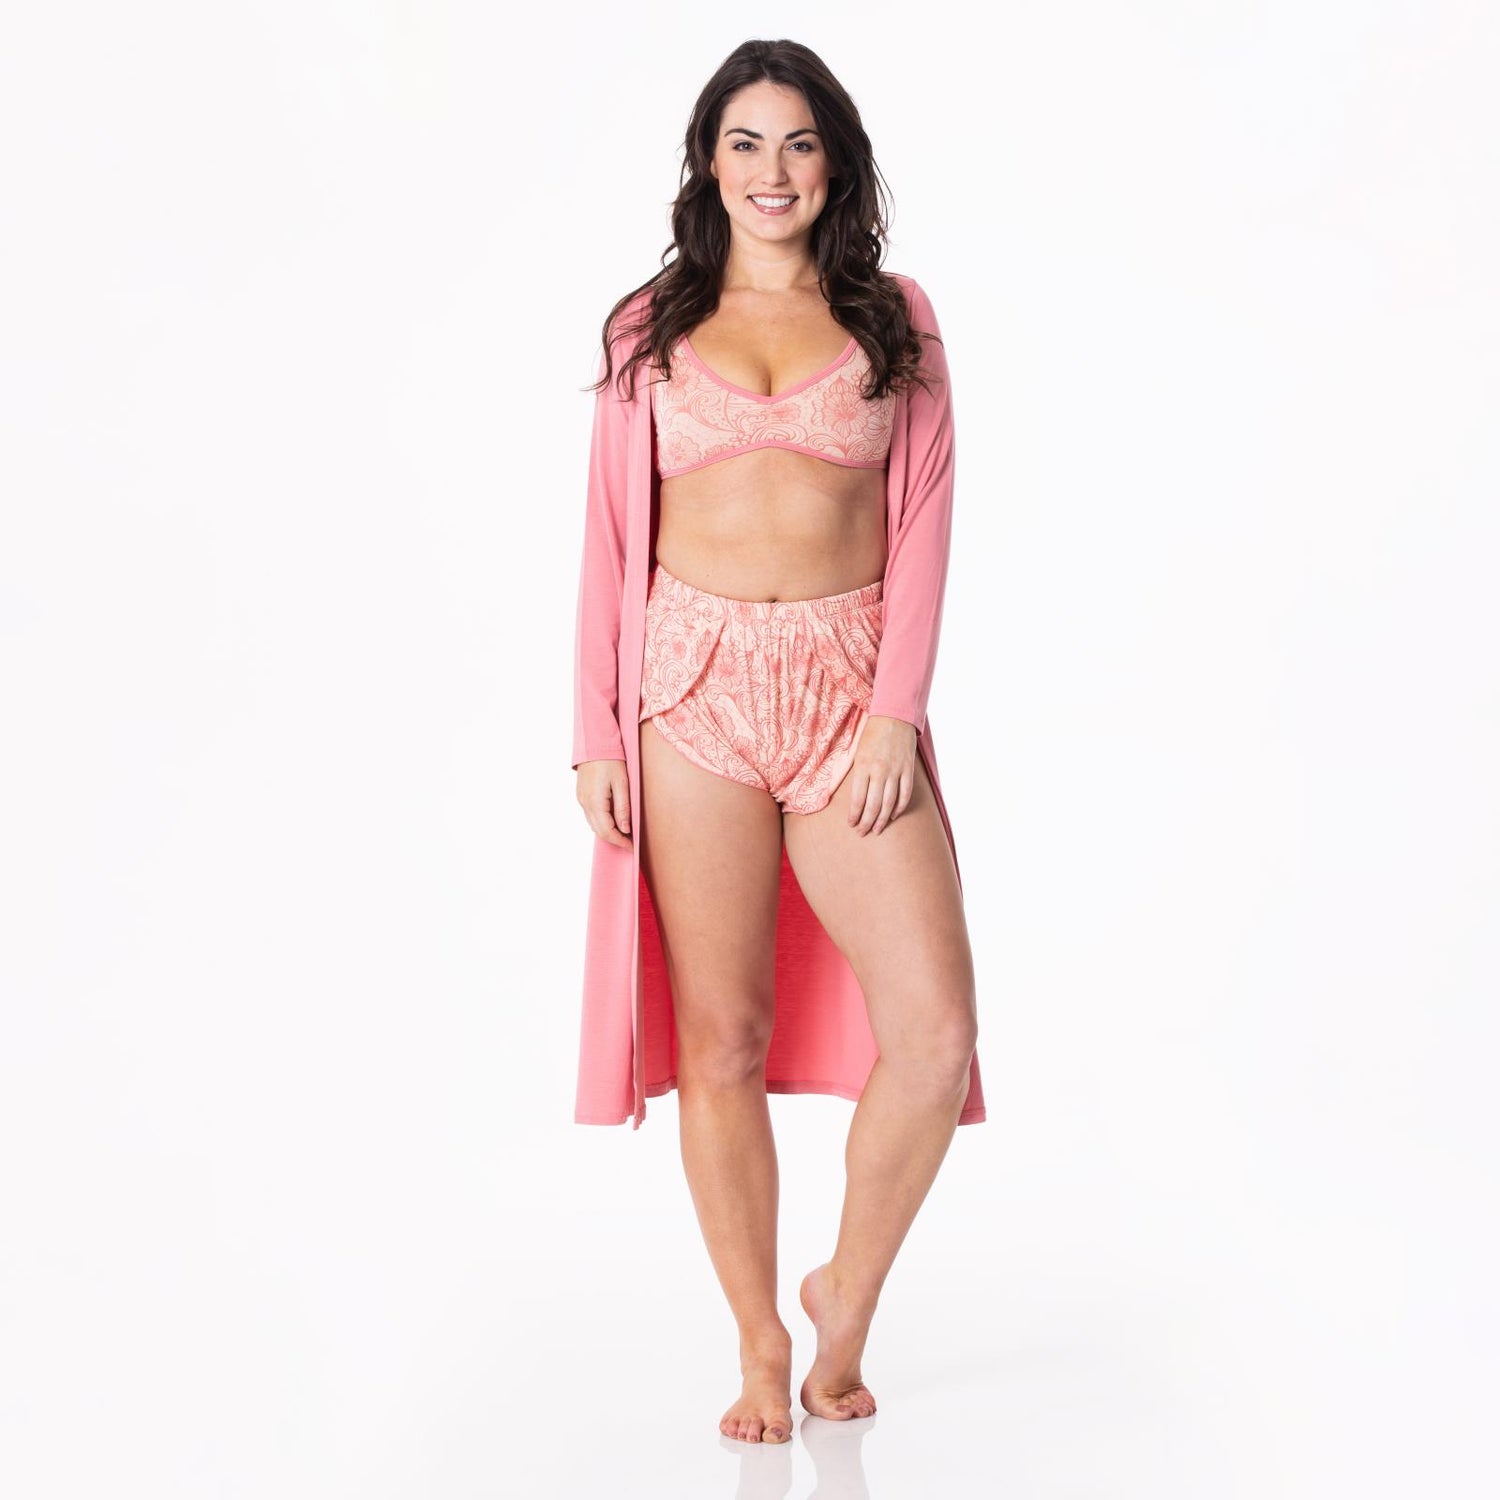 Women's Print Sleeping Bra, Tulip Shorts and Duster Robe Set in Peach Blossom Lace